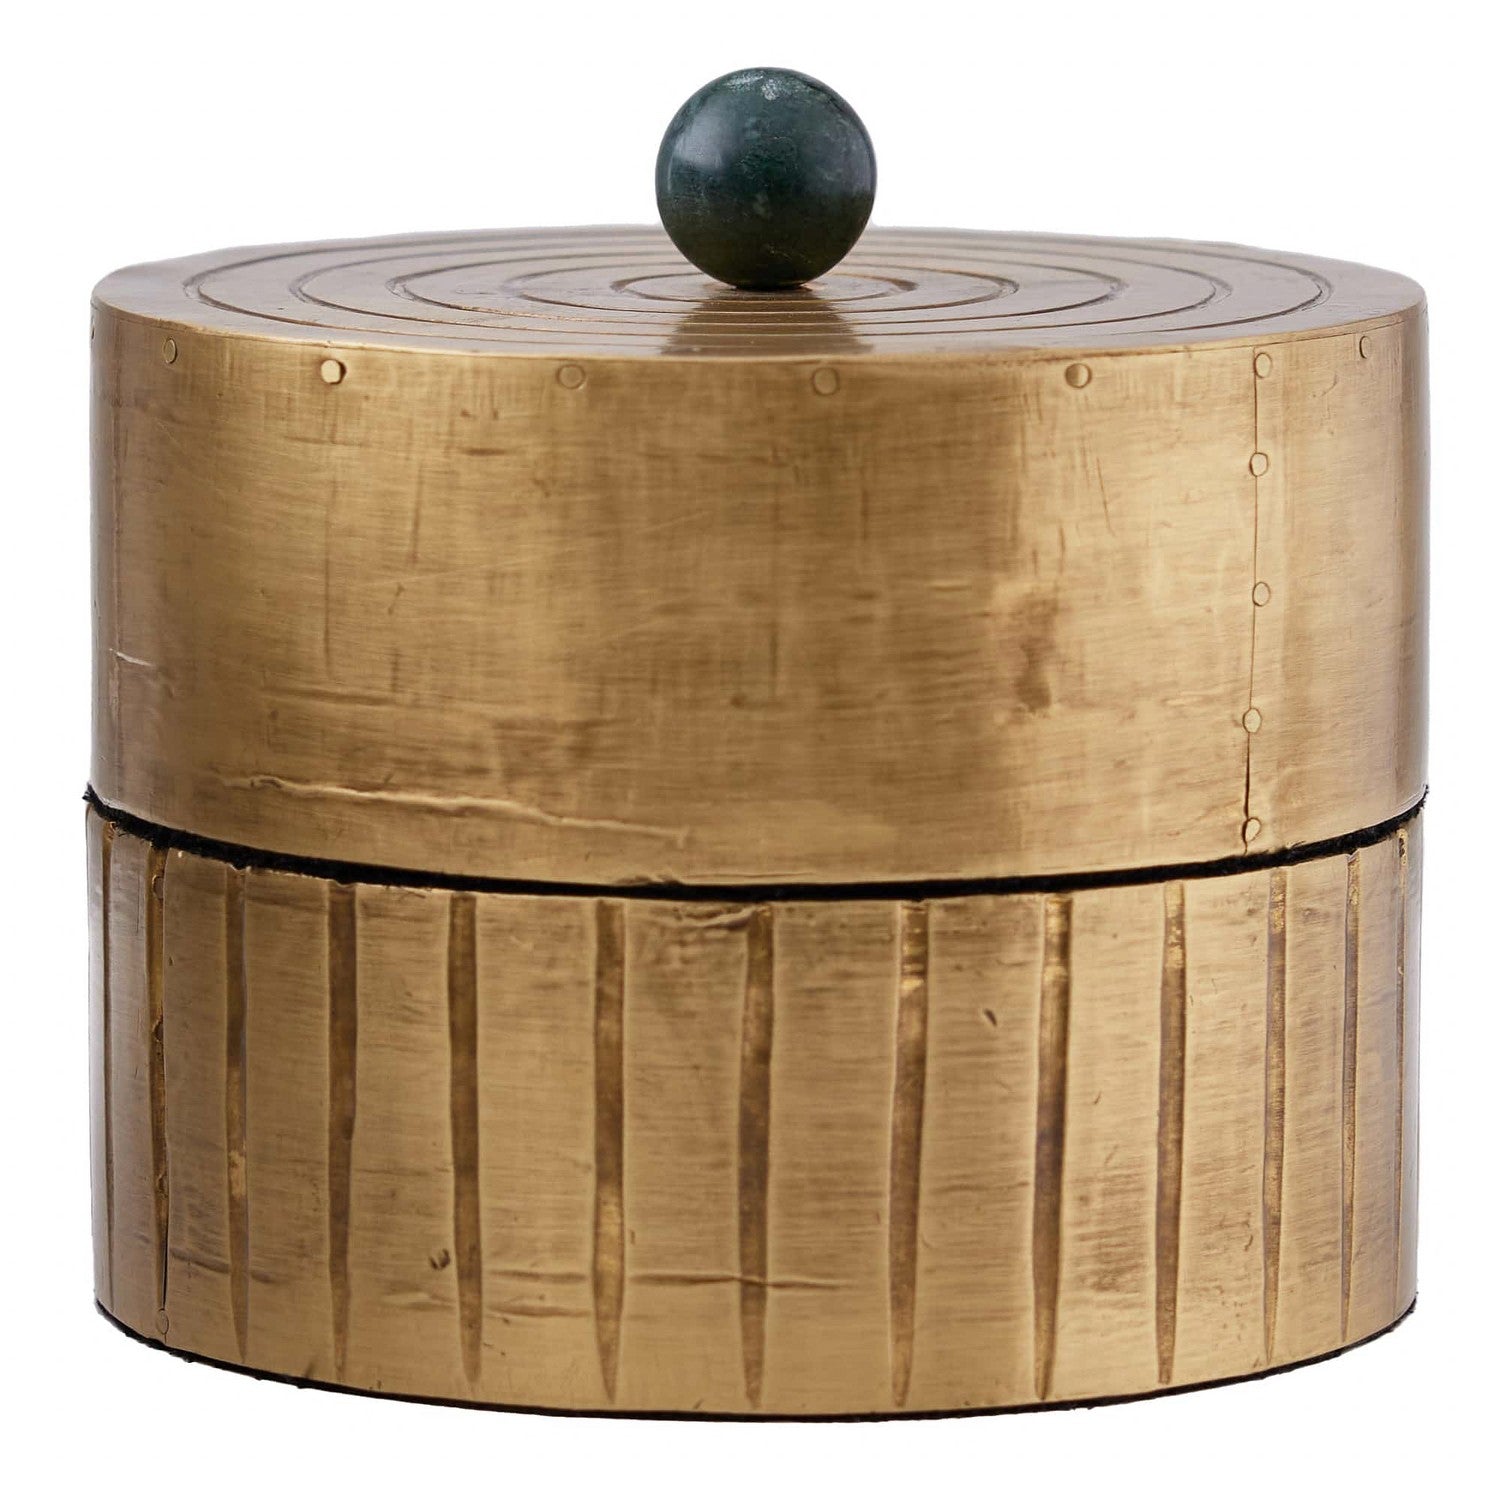 Box from the Truitt collection in Antique Brass finish